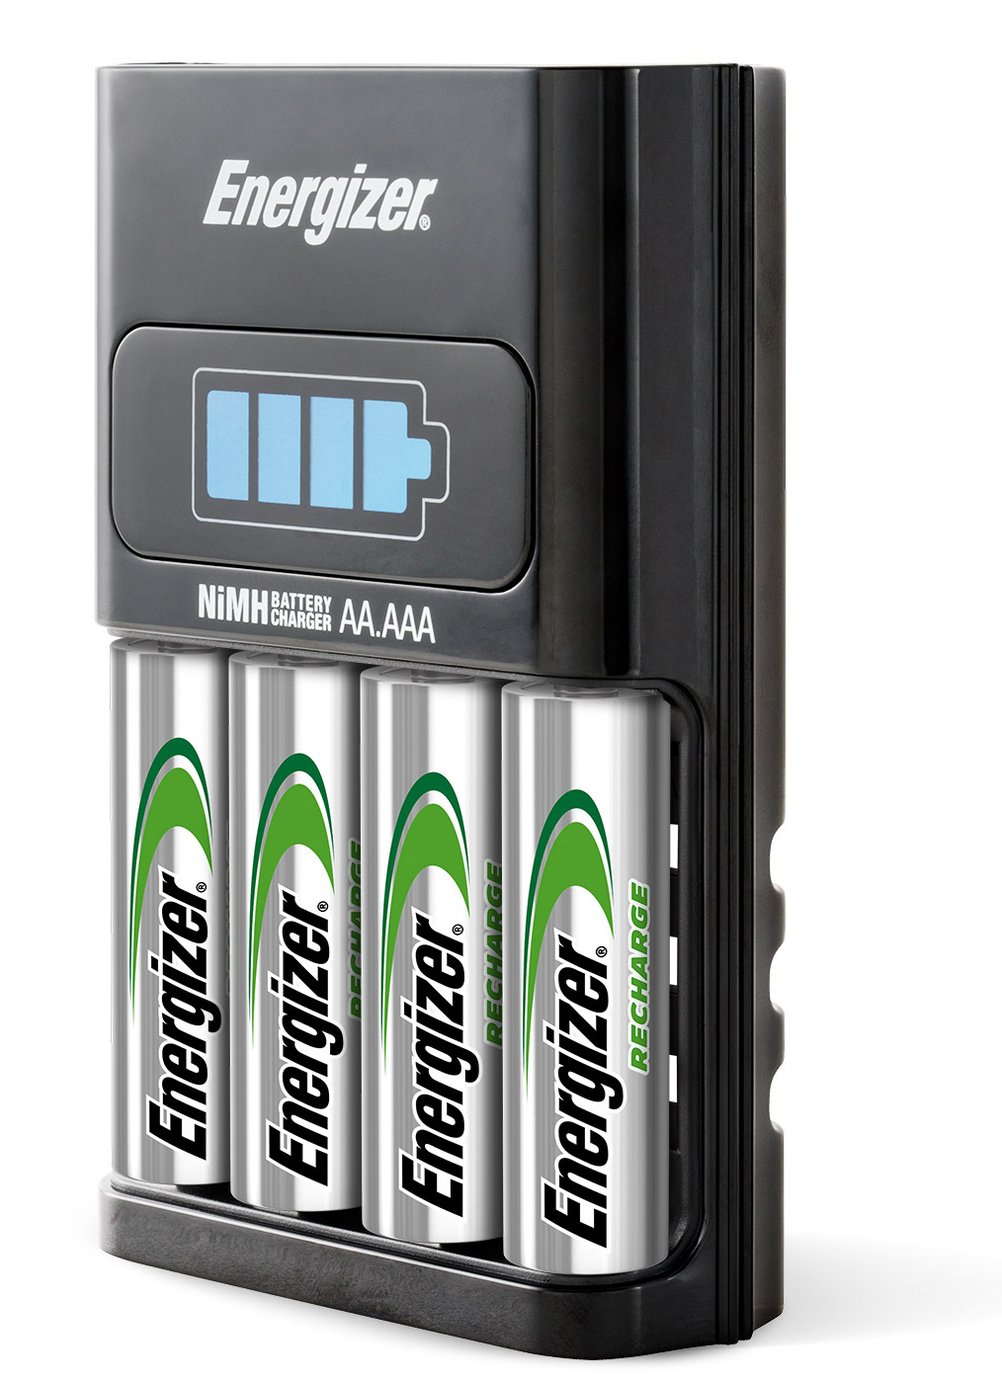 Energizer 1 Hour Battery Charger with 4 x AA Batteries Review